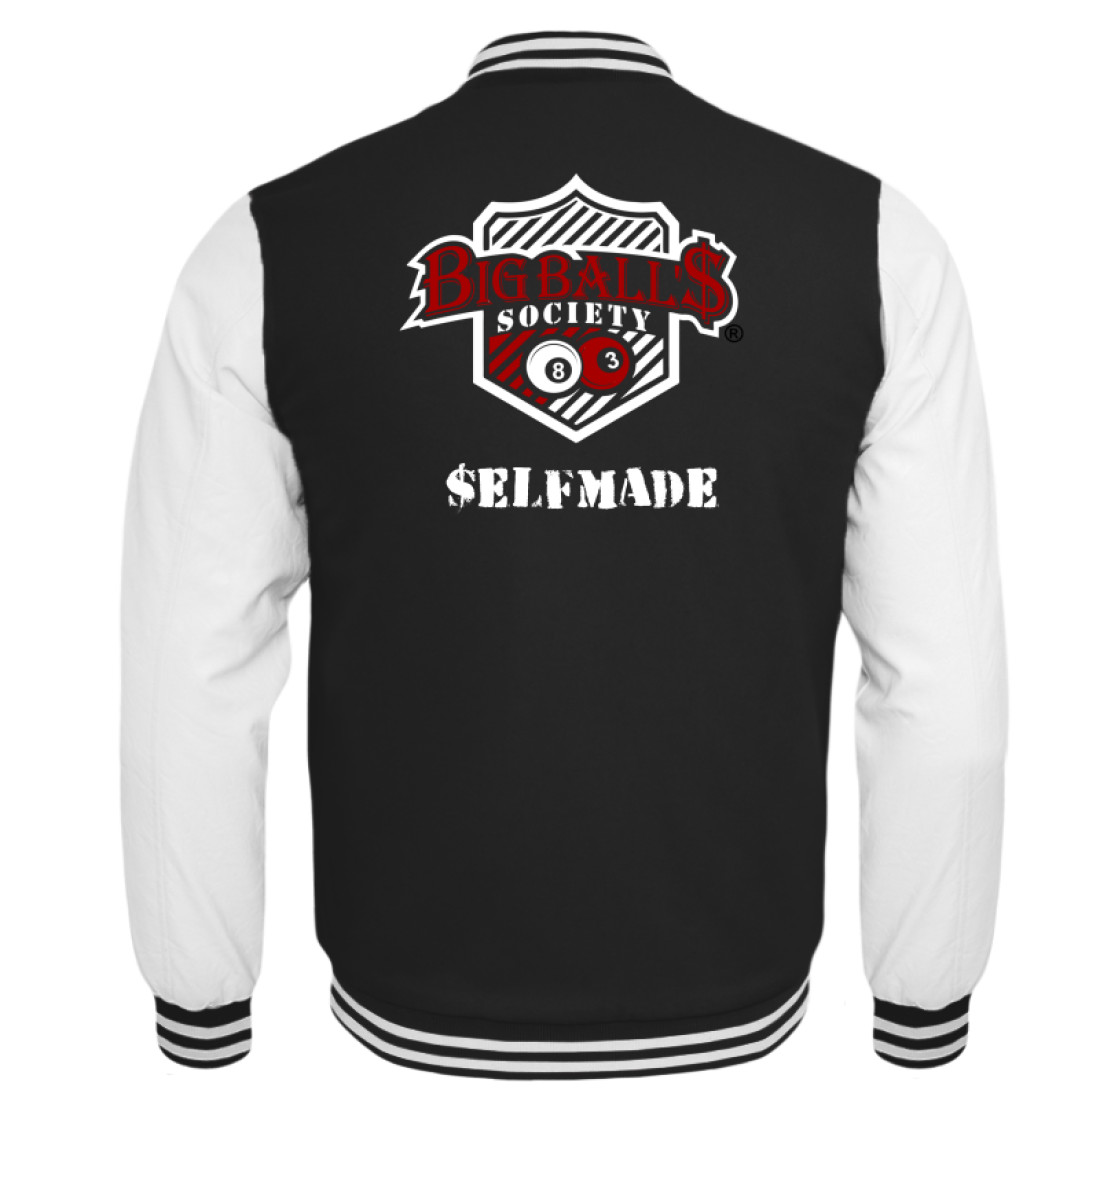 $elfmade White/ Red by Big Ball'$ Society  - Kinder College Sweatjacke